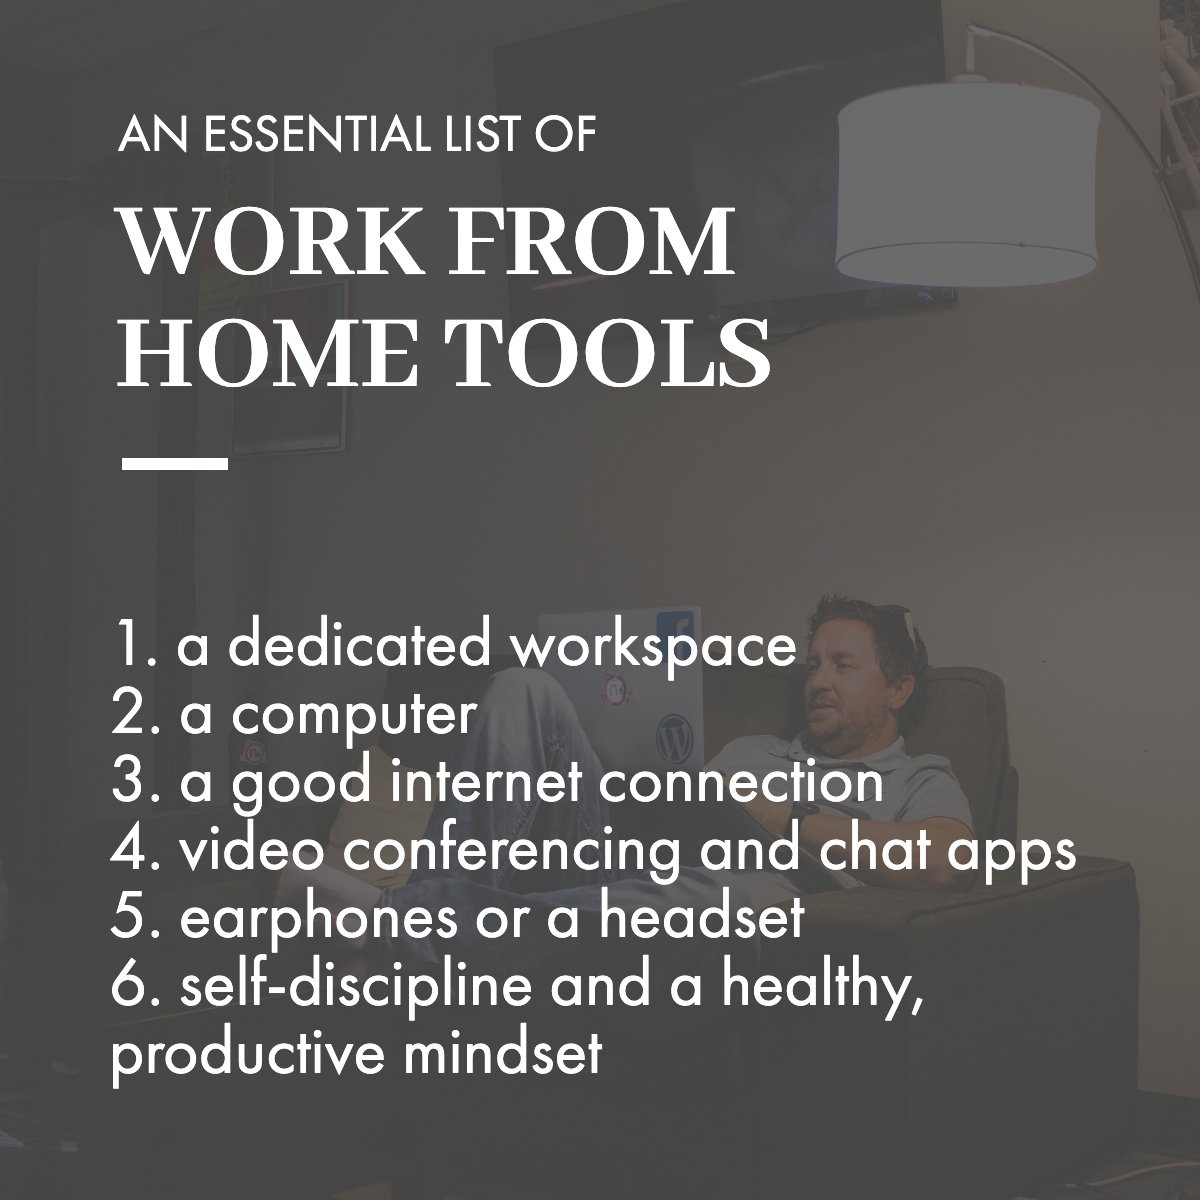 Check the list for essentials to work from home 💻

#workfromhome #workathome #homelifestyle #homestudio #remotelife
 #sellingsanantonio #buyinghomes #sanantoniohomes #militarysanantonio #jointbasesanantonio #relocationsanantonio